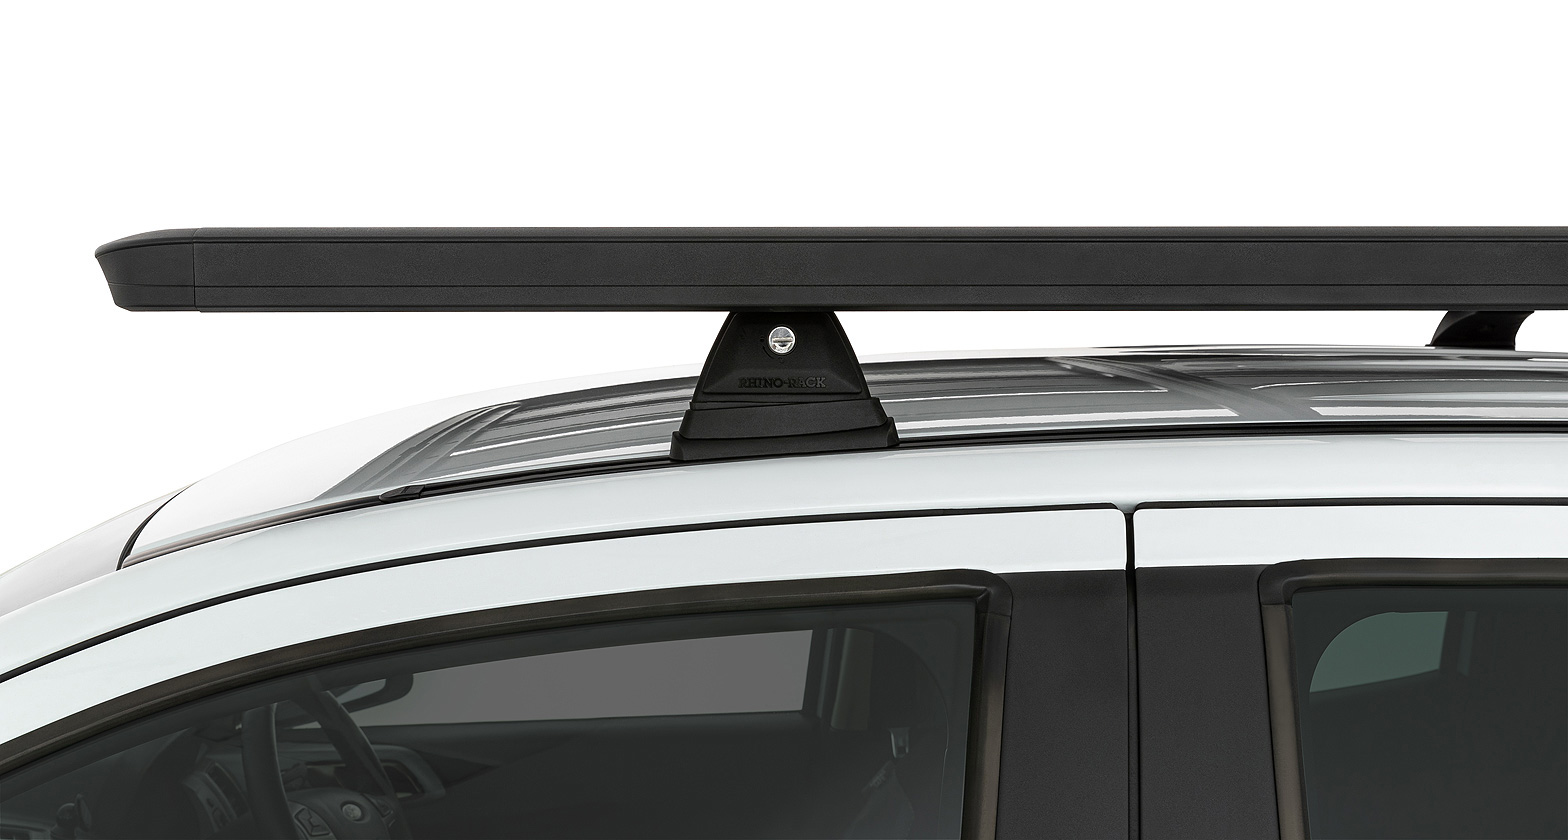 Rhino Rack JC-01679 Pioneer 6 Platform (1900mm x 1380mm) with RCH legs for Lexus LX470 5dr SUV with Bare Roof (1998 to 2007) - Factory Point Mount